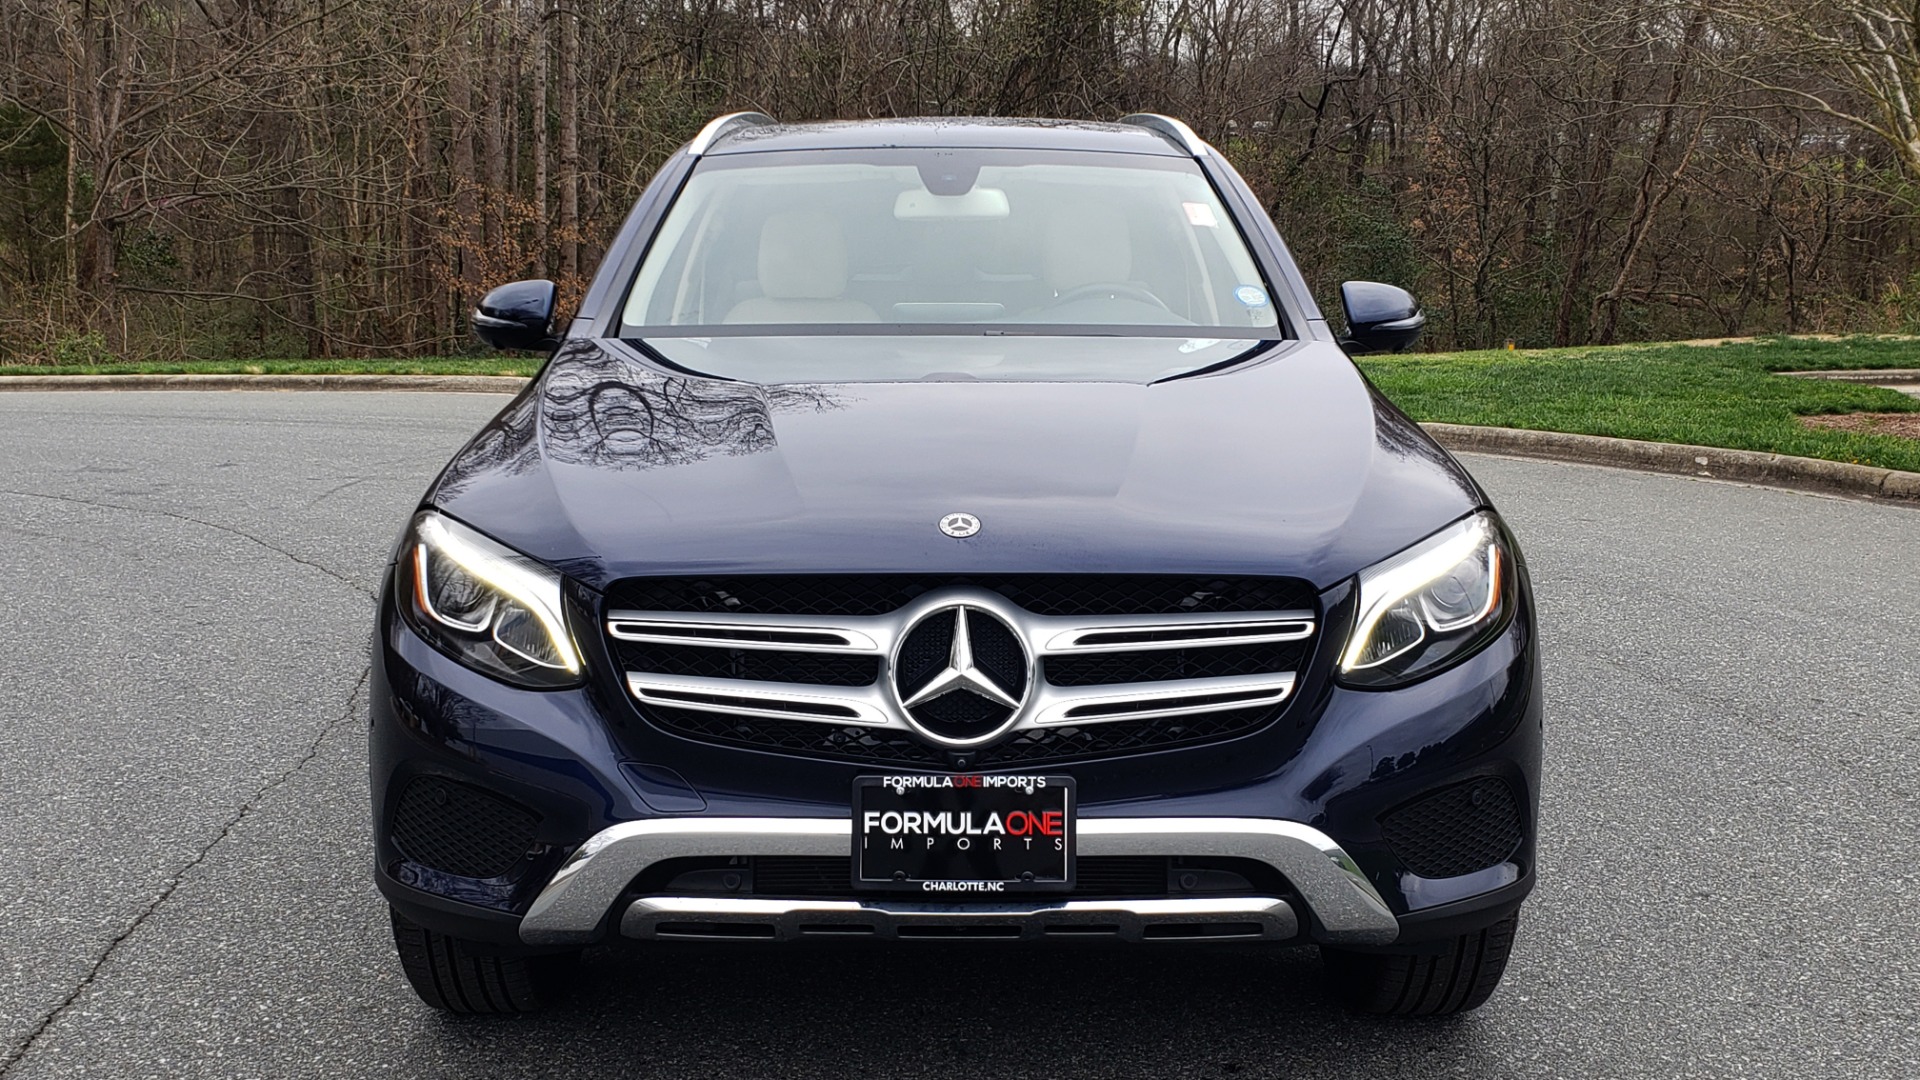 Used 2019 Mercedes-Benz GLC 300 PREMIUM / PRK ASST / NAV / PANO-ROOF / REARVIEW / HTD STS for sale Sold at Formula Imports in Charlotte NC 28227 22